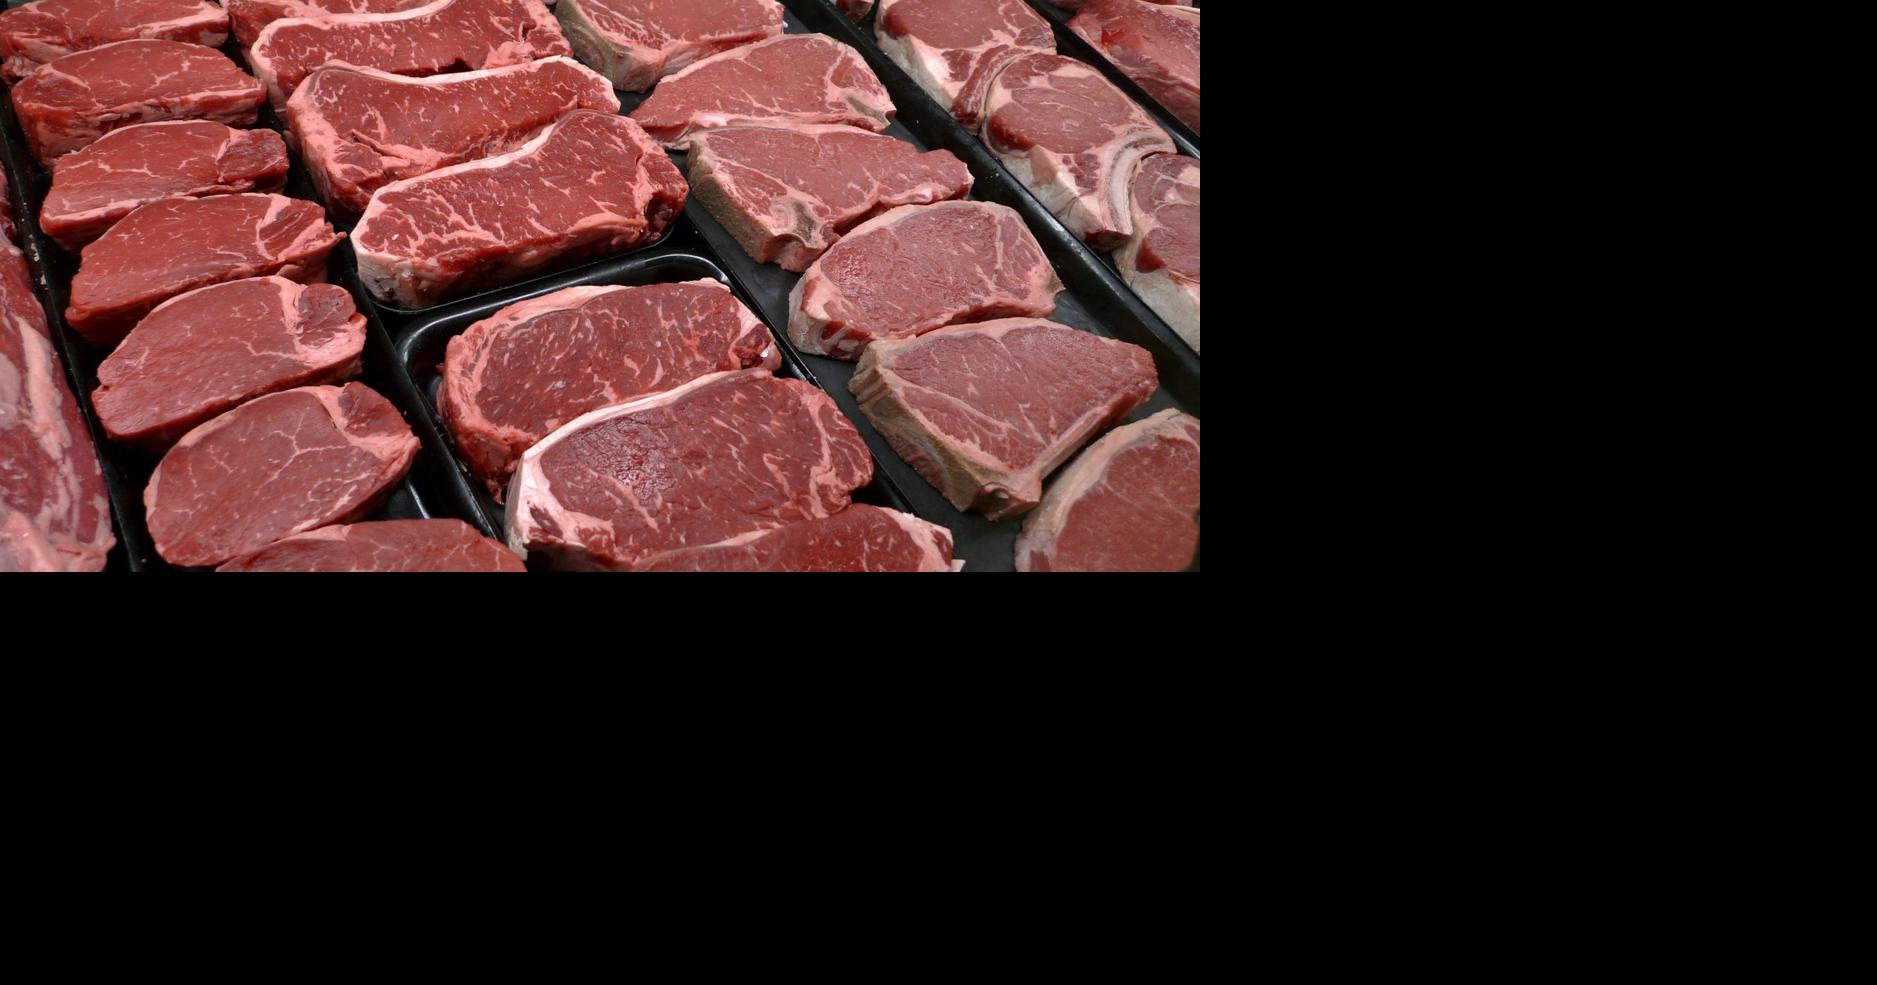 Meat packers' profit margins jumped 300% during pandemic - White House  economics team